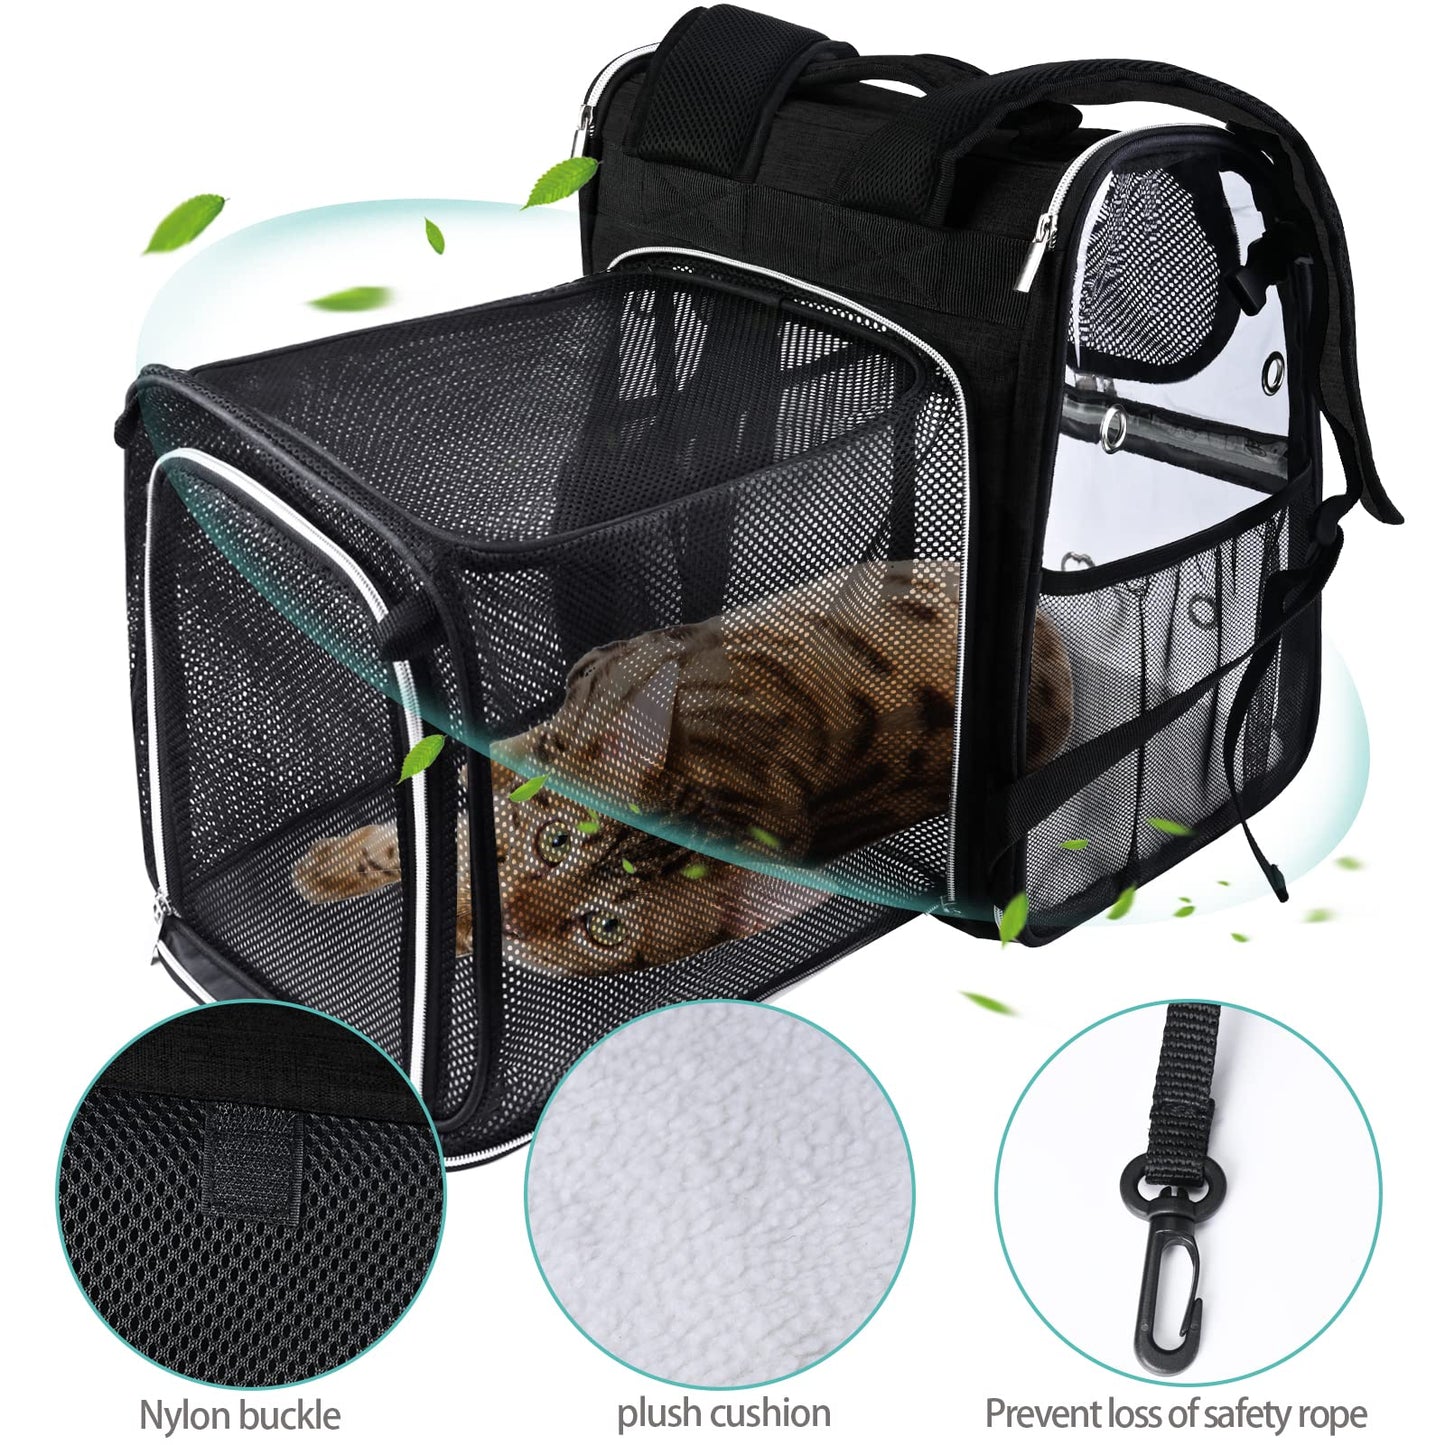 BAGLHER Expandable Pet Carrier Backpack，Pet Bubble Backpack for Small Cats Puppies Dogs Bunny, Airline-Approved Ventilate Transparent Capsule Backpack for Travel, Hiking and Outdoor Use.